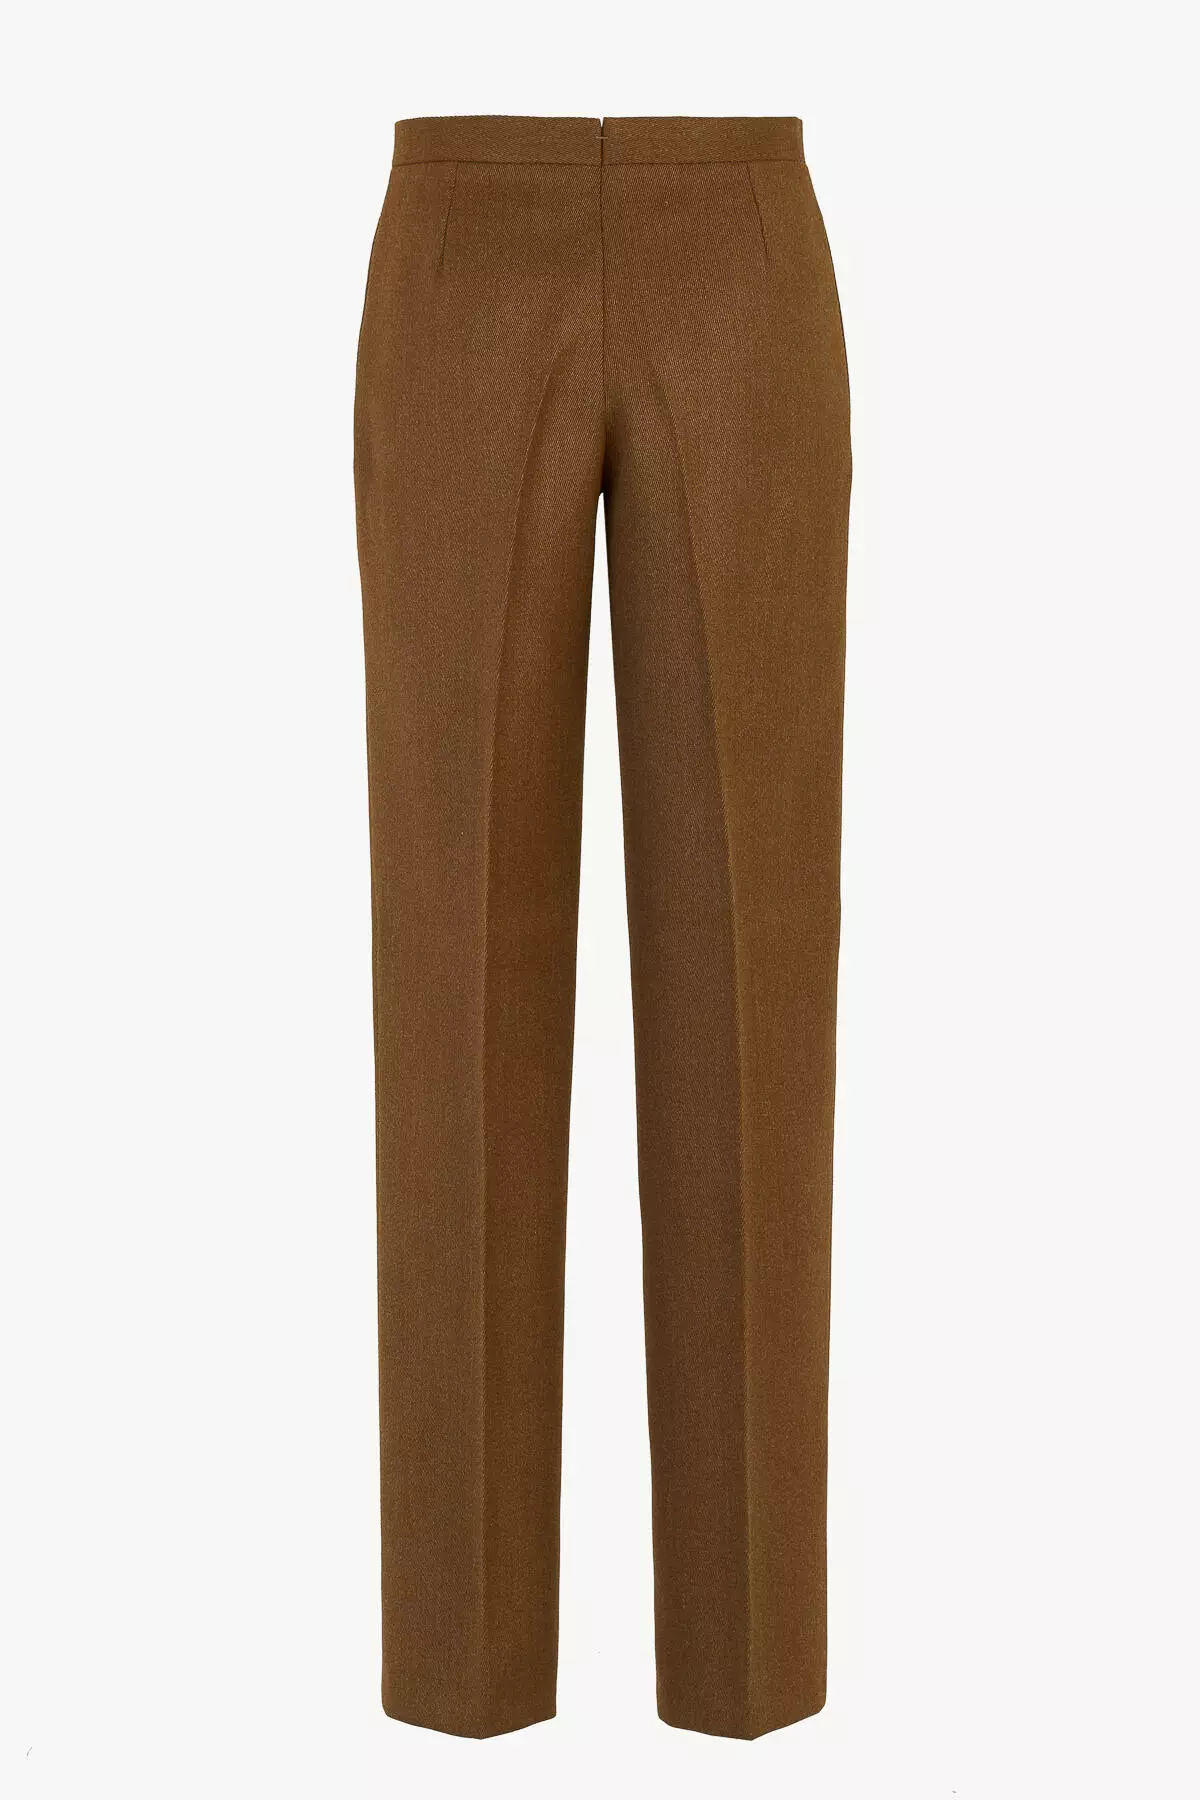 Janice Trousers in Wool Heritage Giuliva - Whipcord